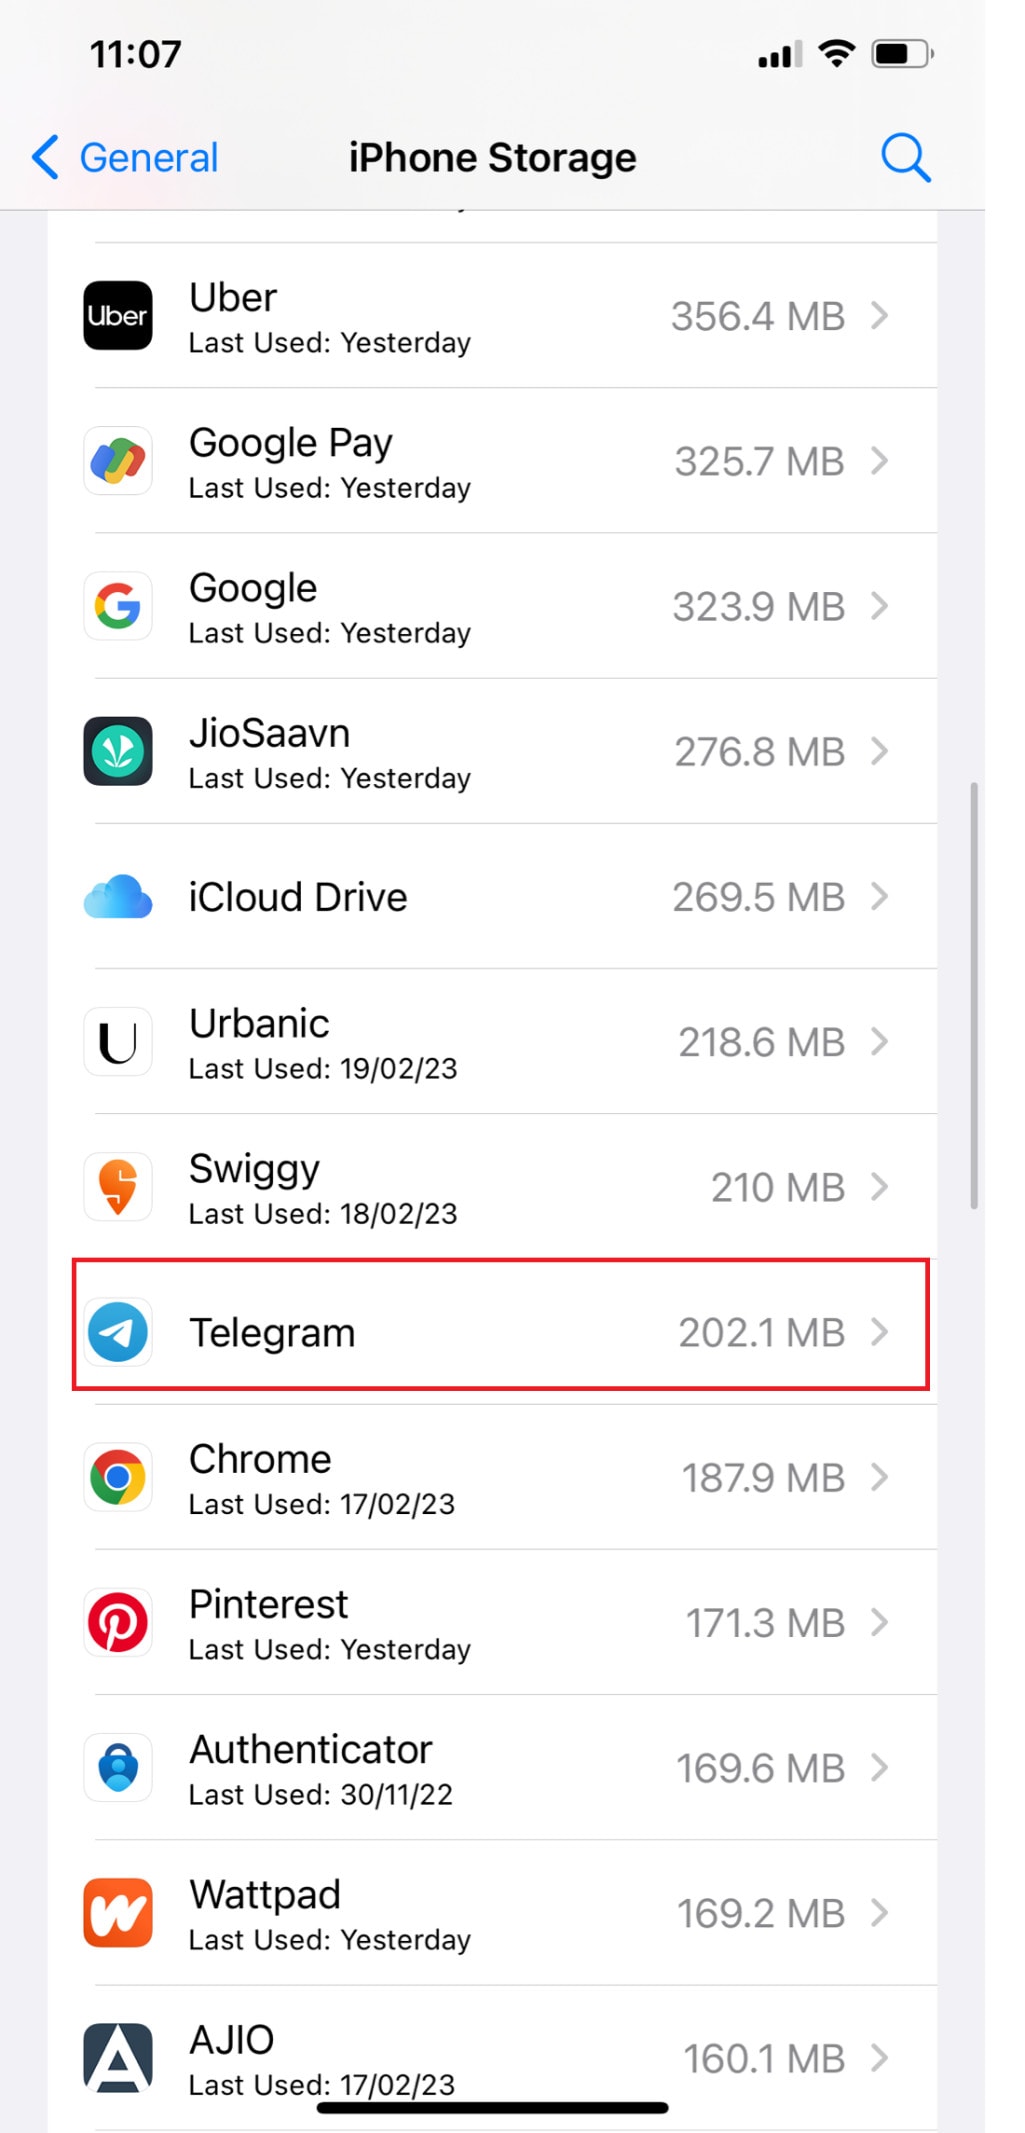 Now, choose Telegram from the list of apps to see how much storage the app is using